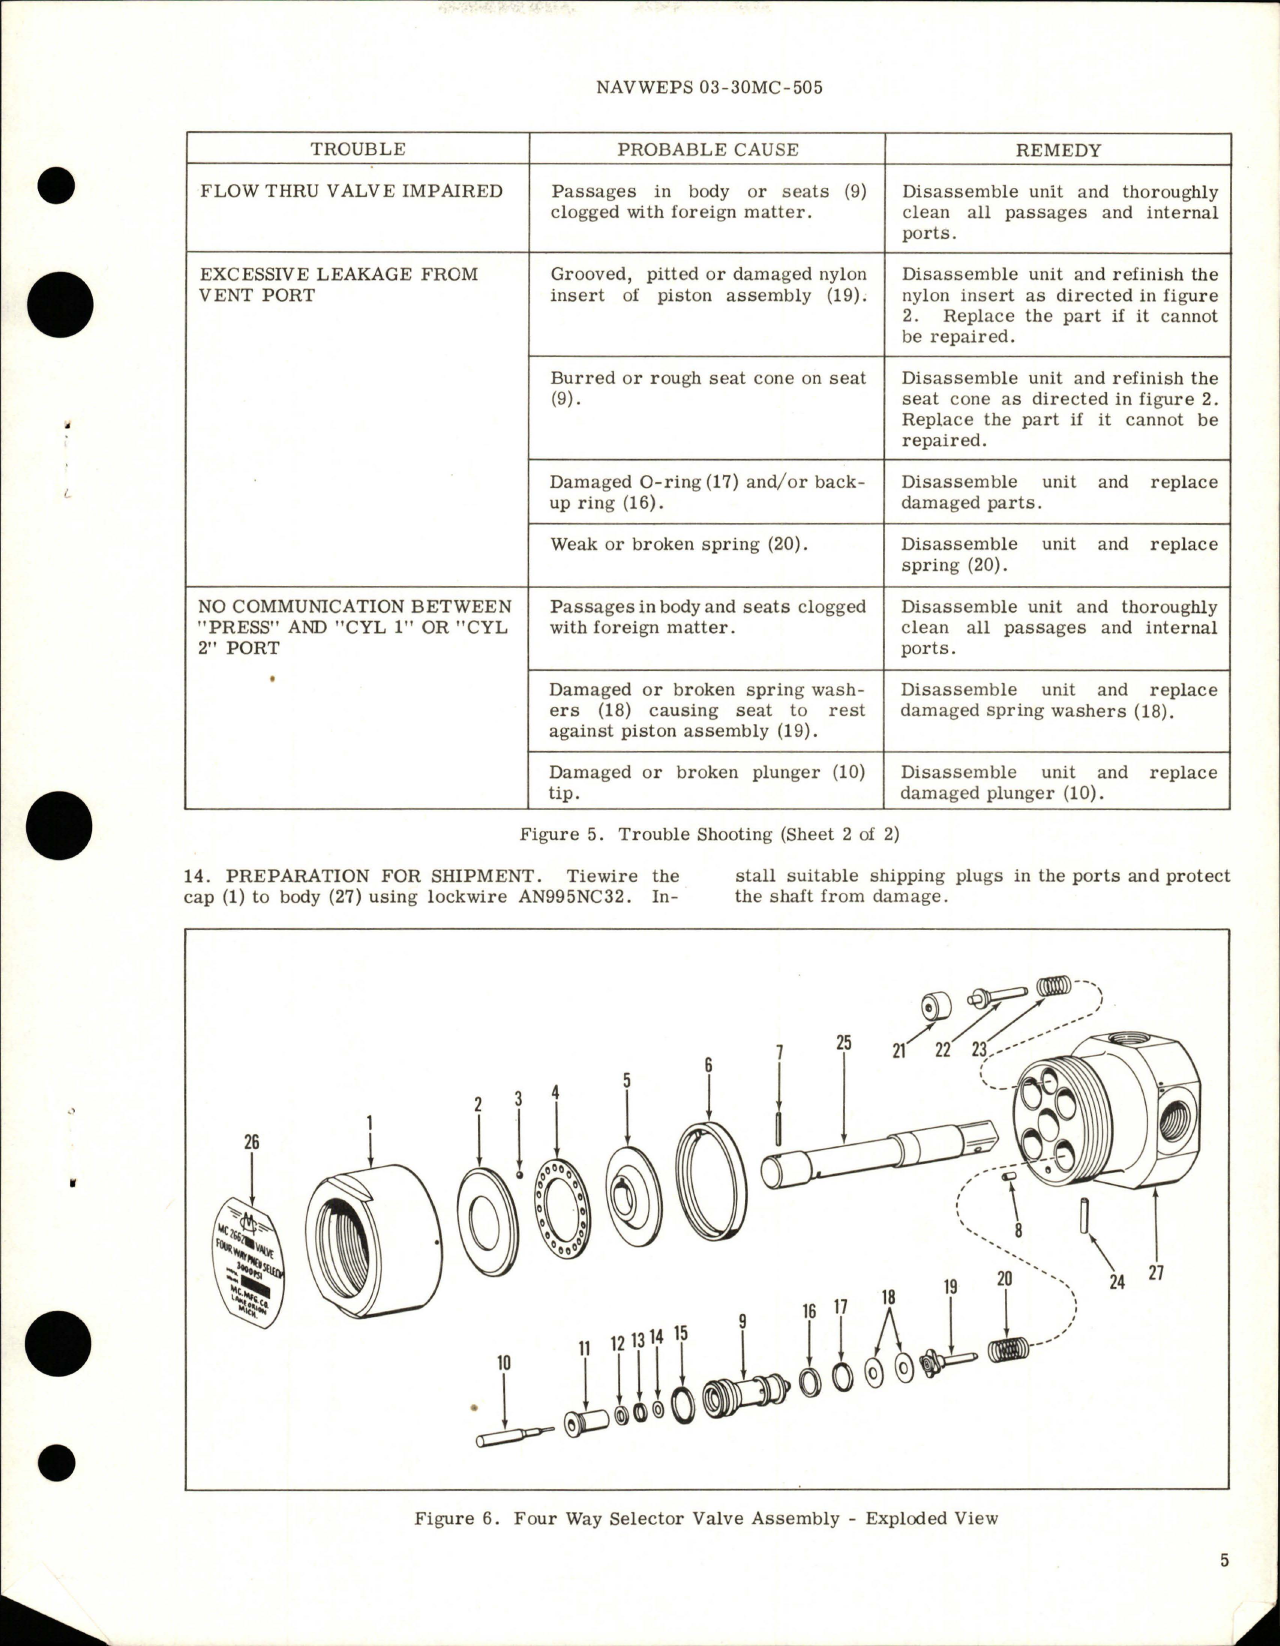 Sample page 5 from AirCorps Library document: Overhaul with Parts Breakdown for Four Way Selector Valve - MC 2662 